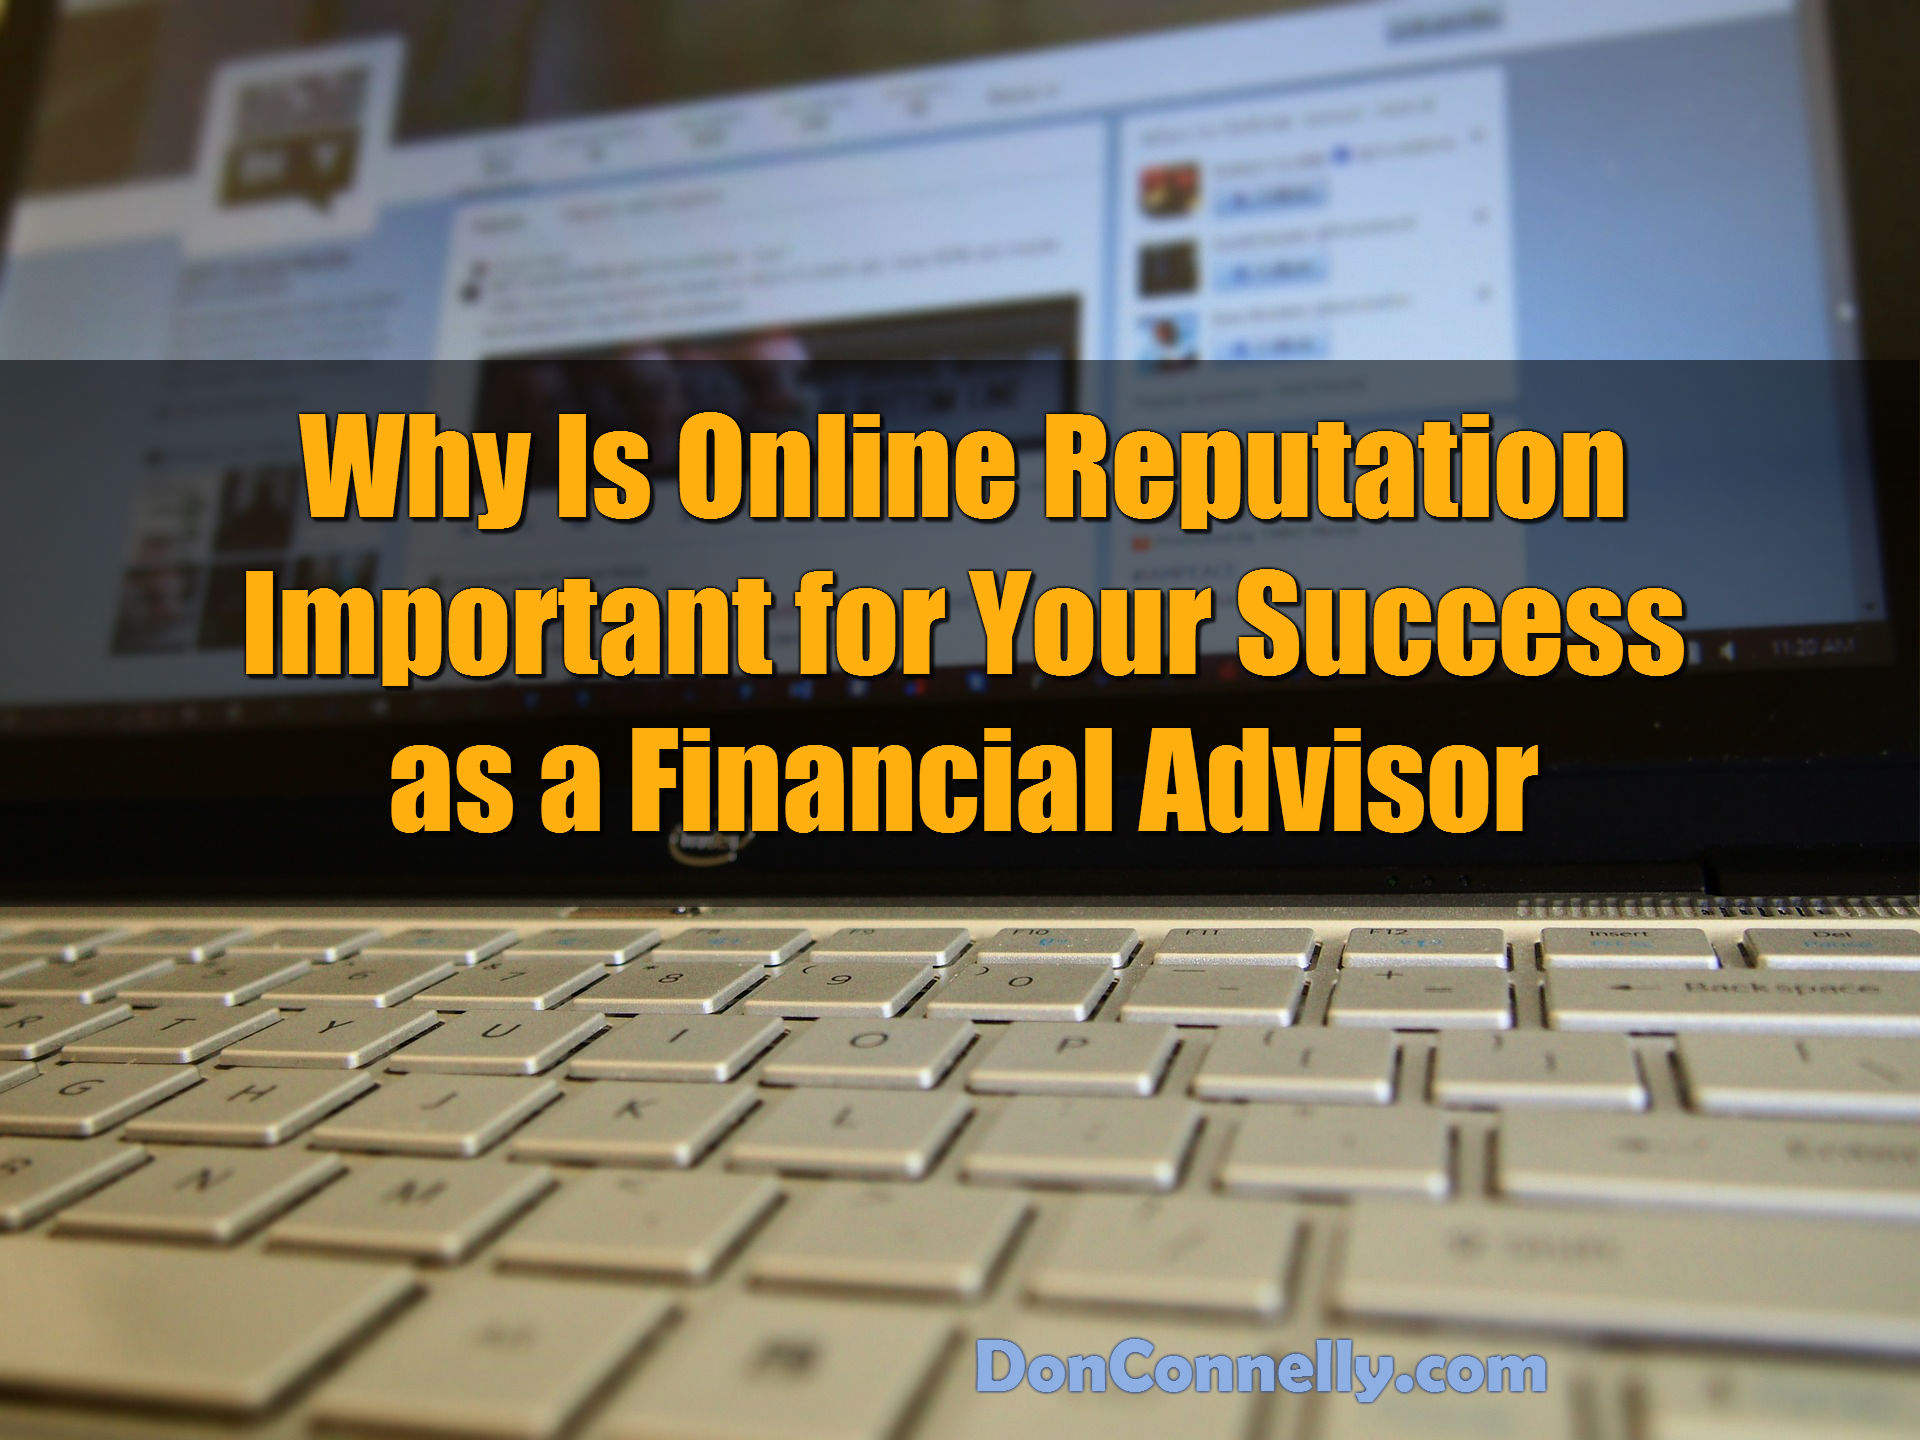 Why Is Online Reputation Important for Your Success as a Financial Advisor